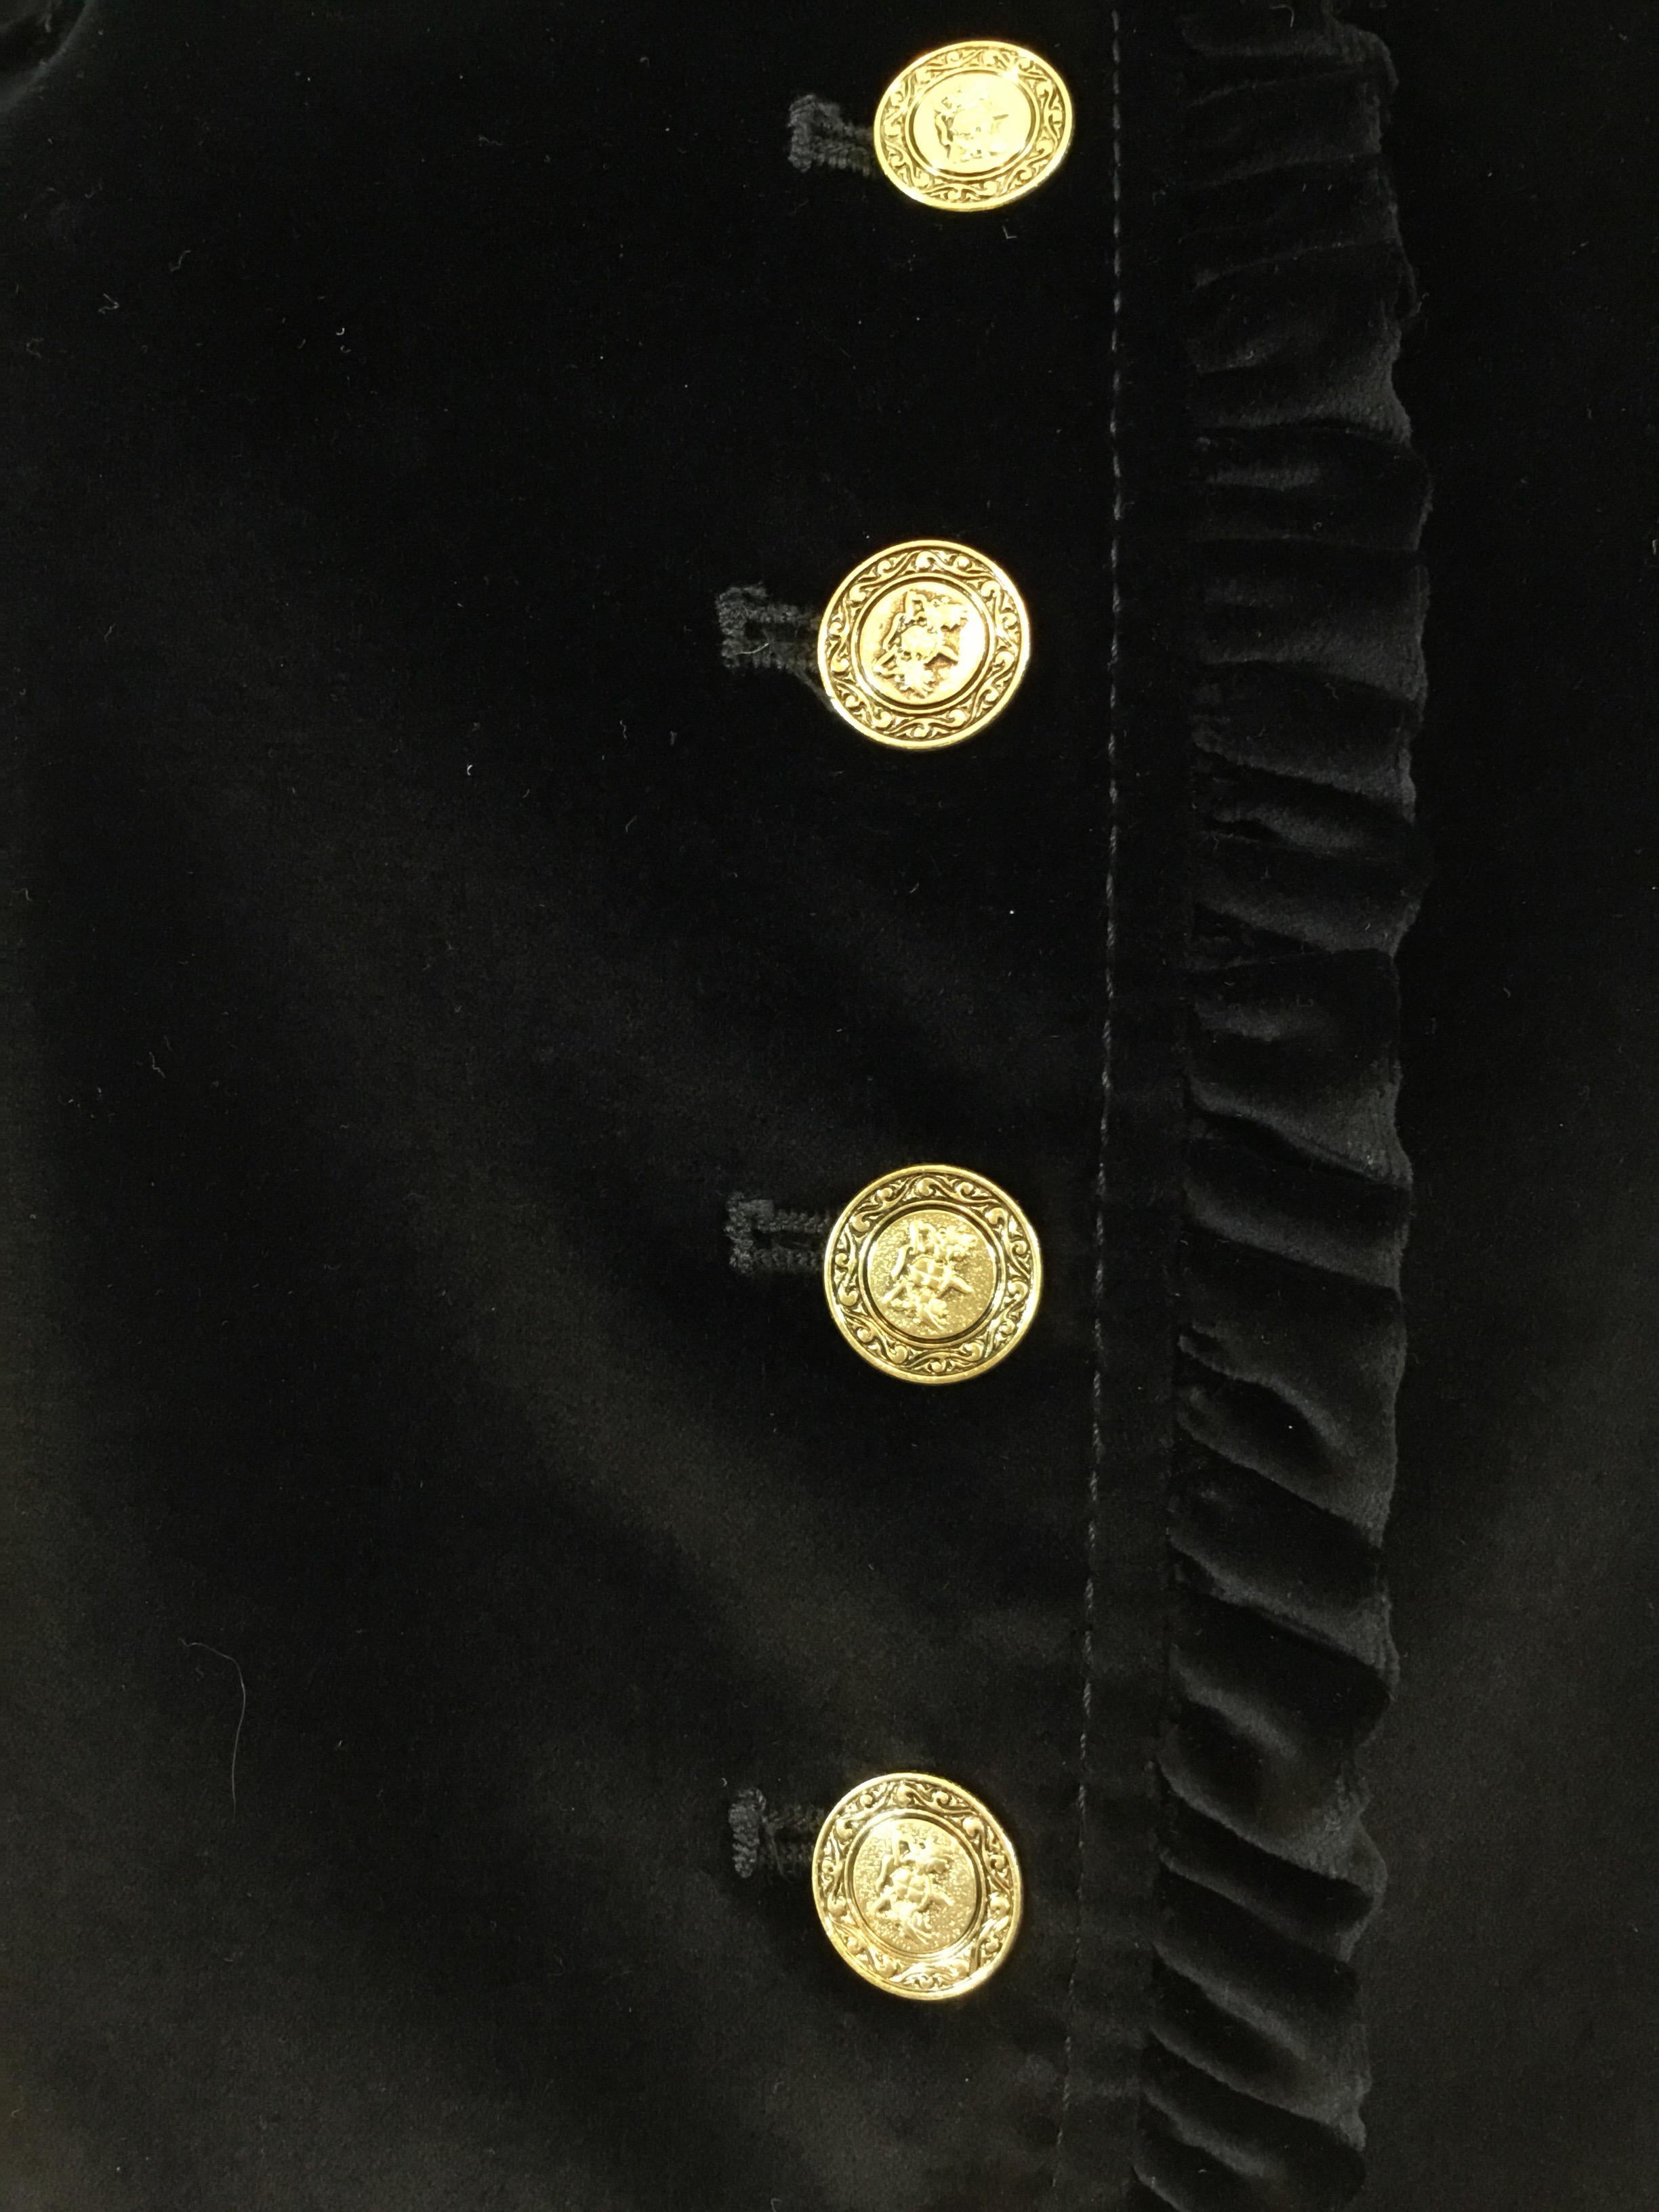 Dolce & Gabbana velvet jacket in black with gold tone button fastenings and a ruffled trim. Jacket has a total of 3 buttoned pockets that have not been cut for use. Fully lined in signature leopard print. Made in Italy, size 44.

Bust 36”, sleeves